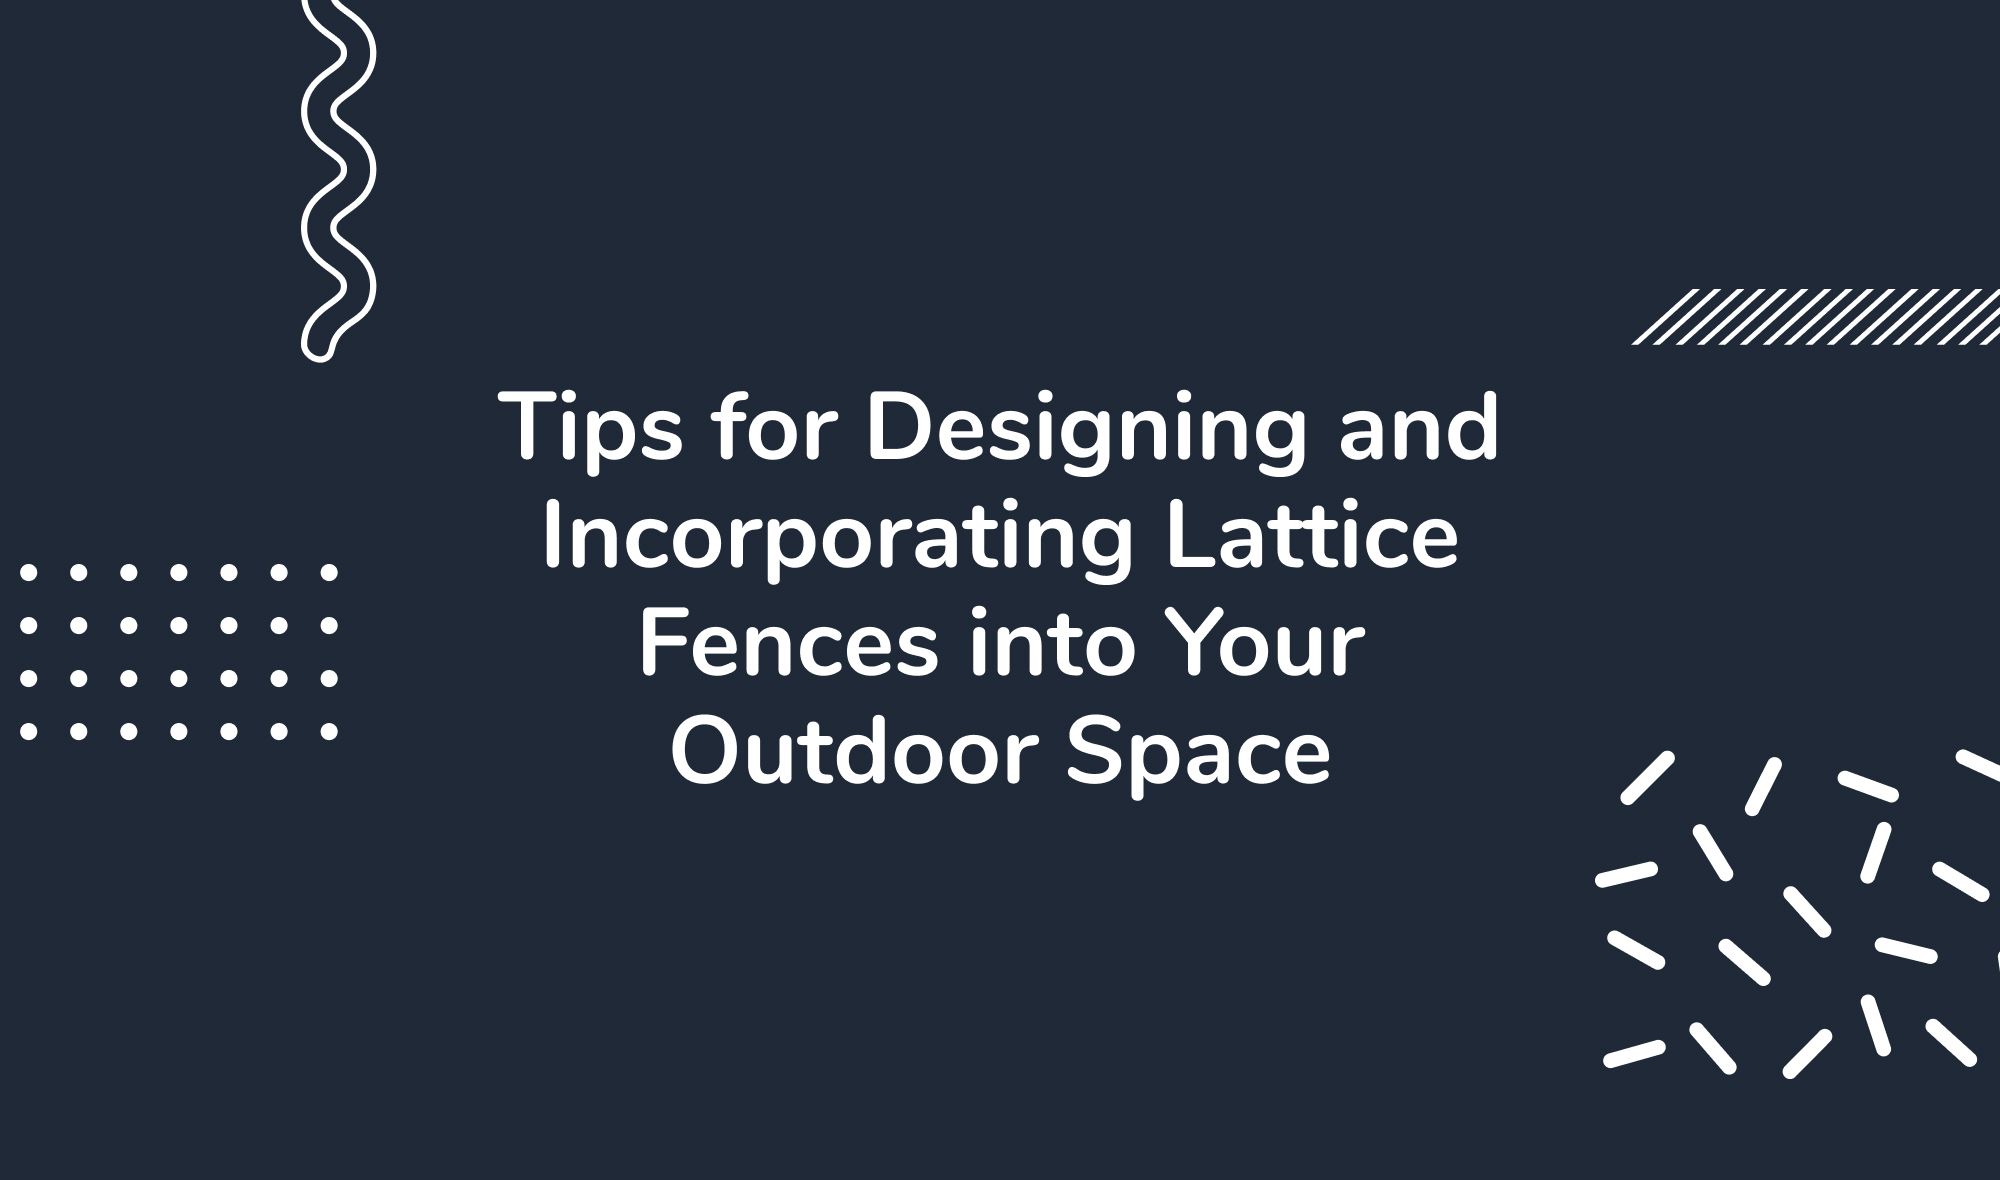 Tips for Designing and Incorporating Lattice Fences into Your Outdoor Space